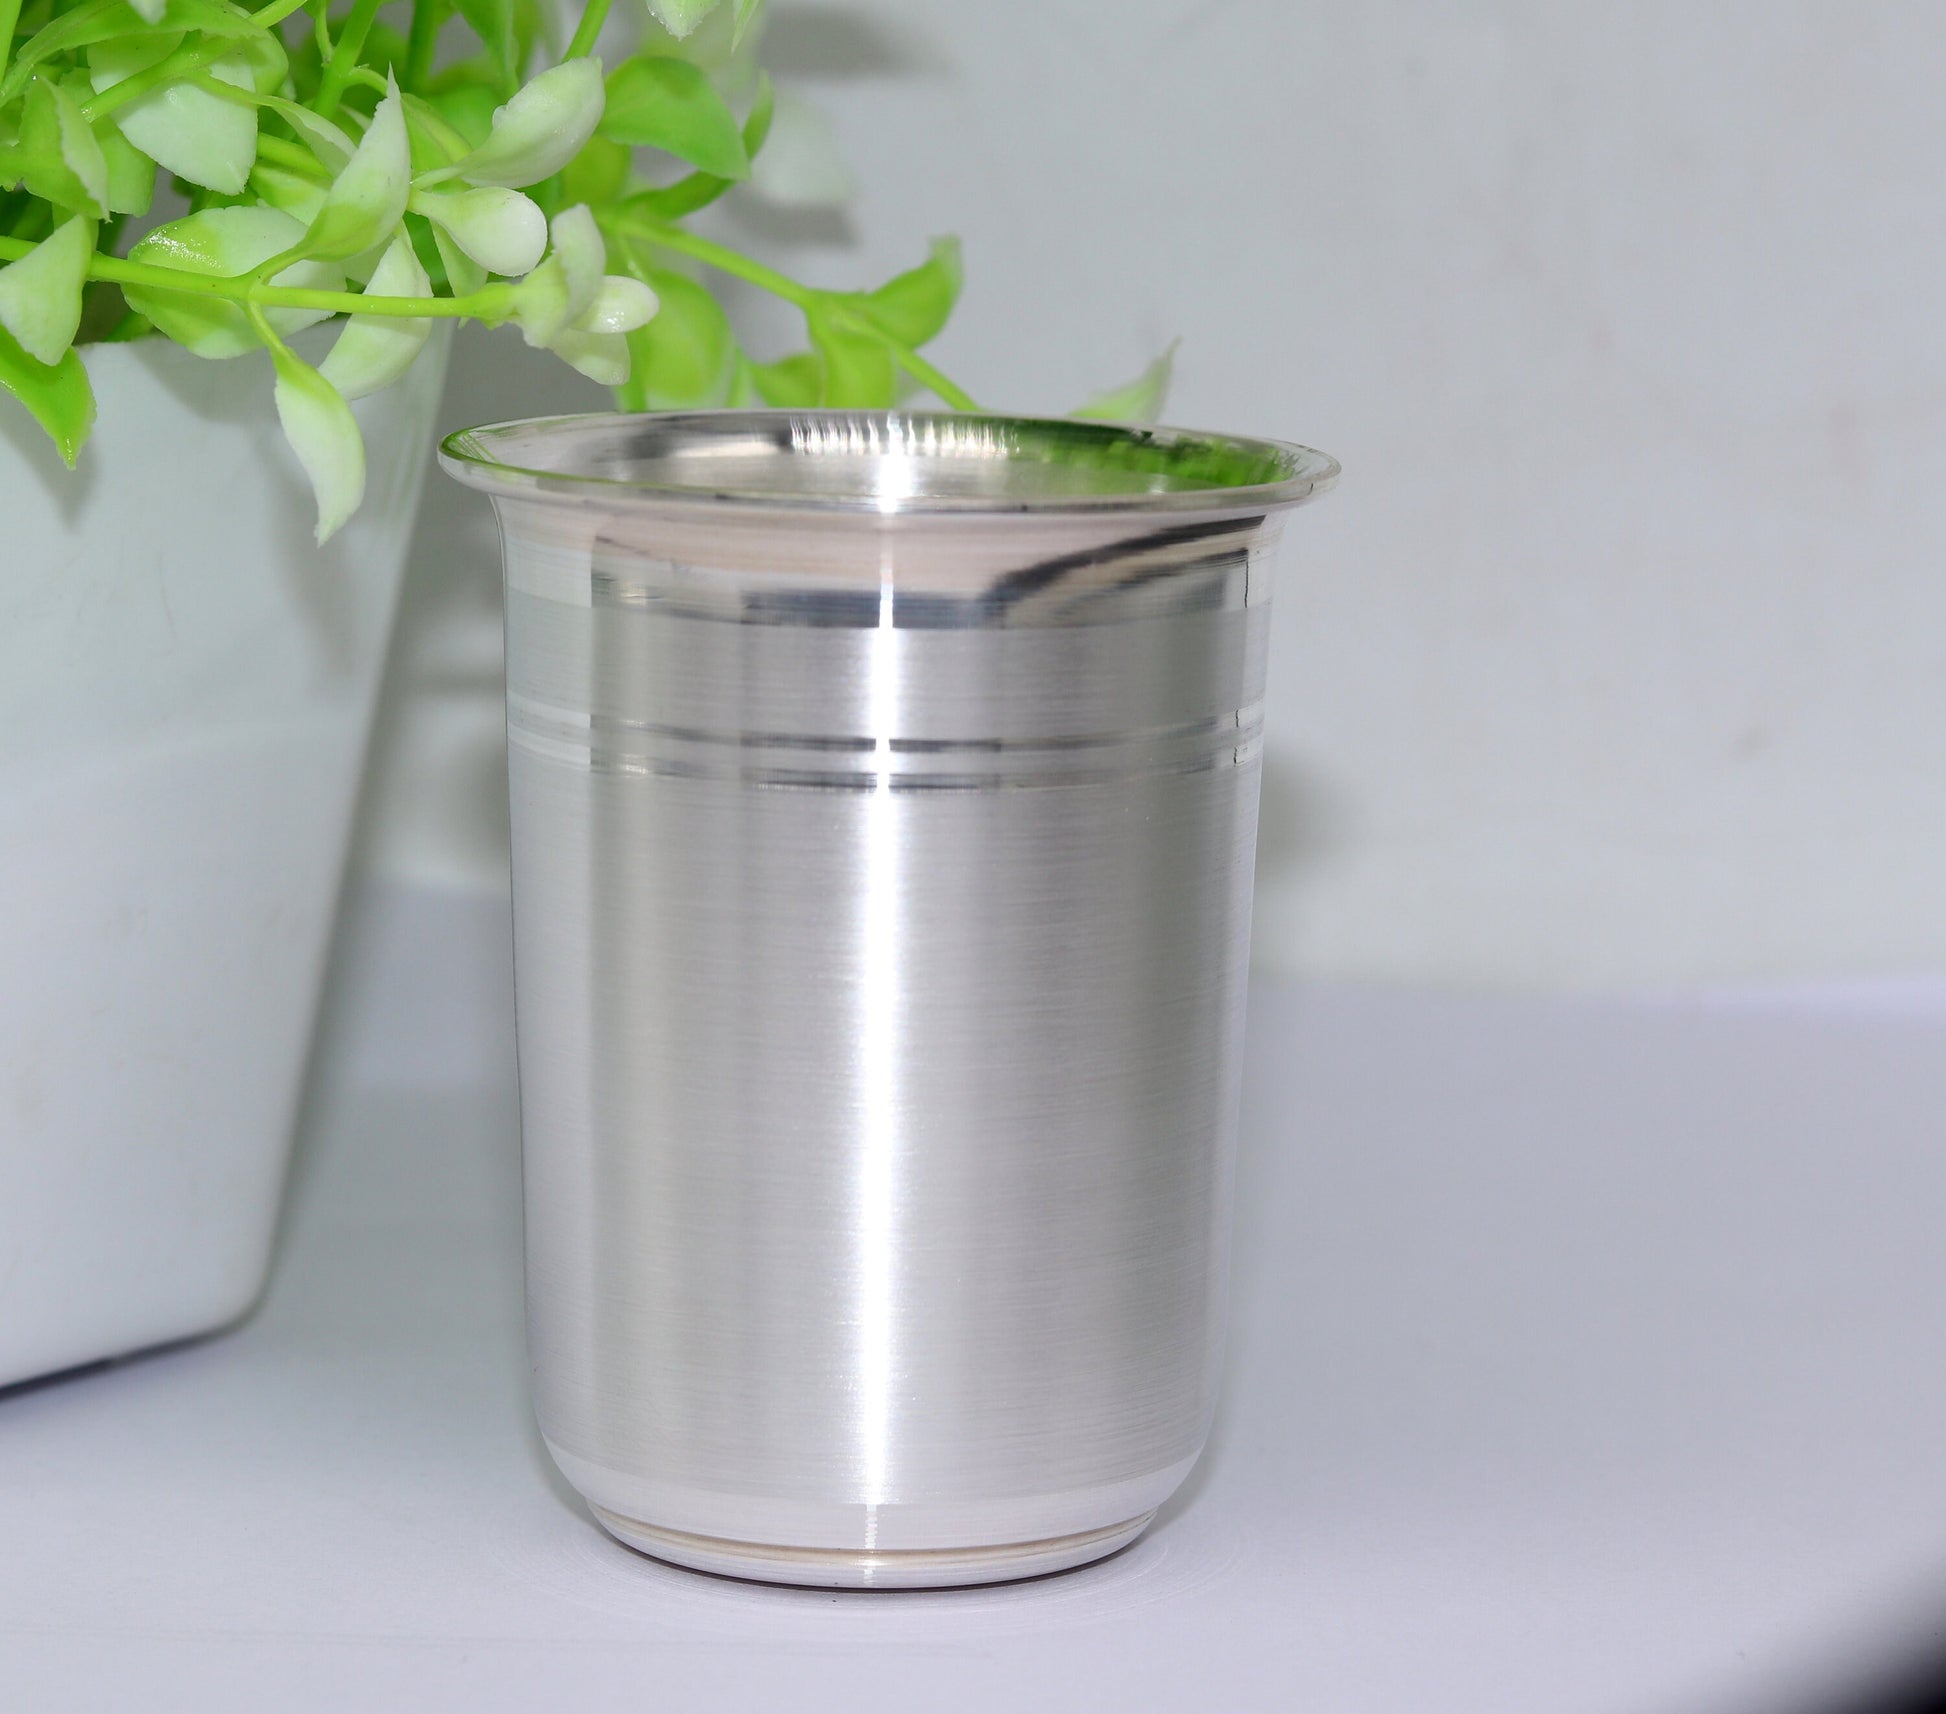 999 Fine silver handmade solid water milk tumbler glass, flask. baby water tumbler for stay healthy, silver utensils for rice ceremony sv77 - TRIBAL ORNAMENTS